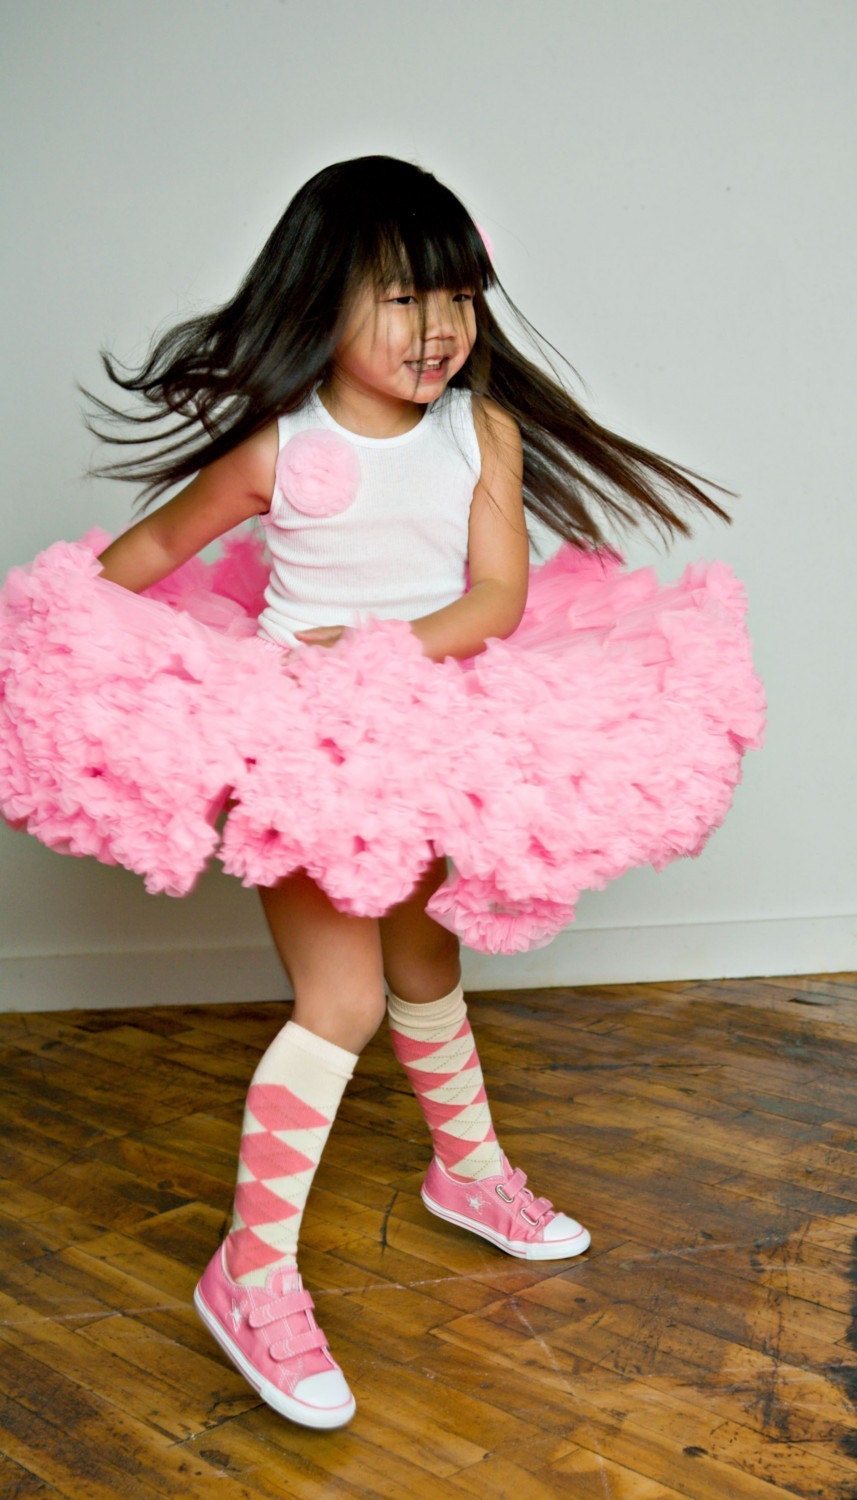 Sweetheart 
Pettiskirt - Your choice of colors and sizes